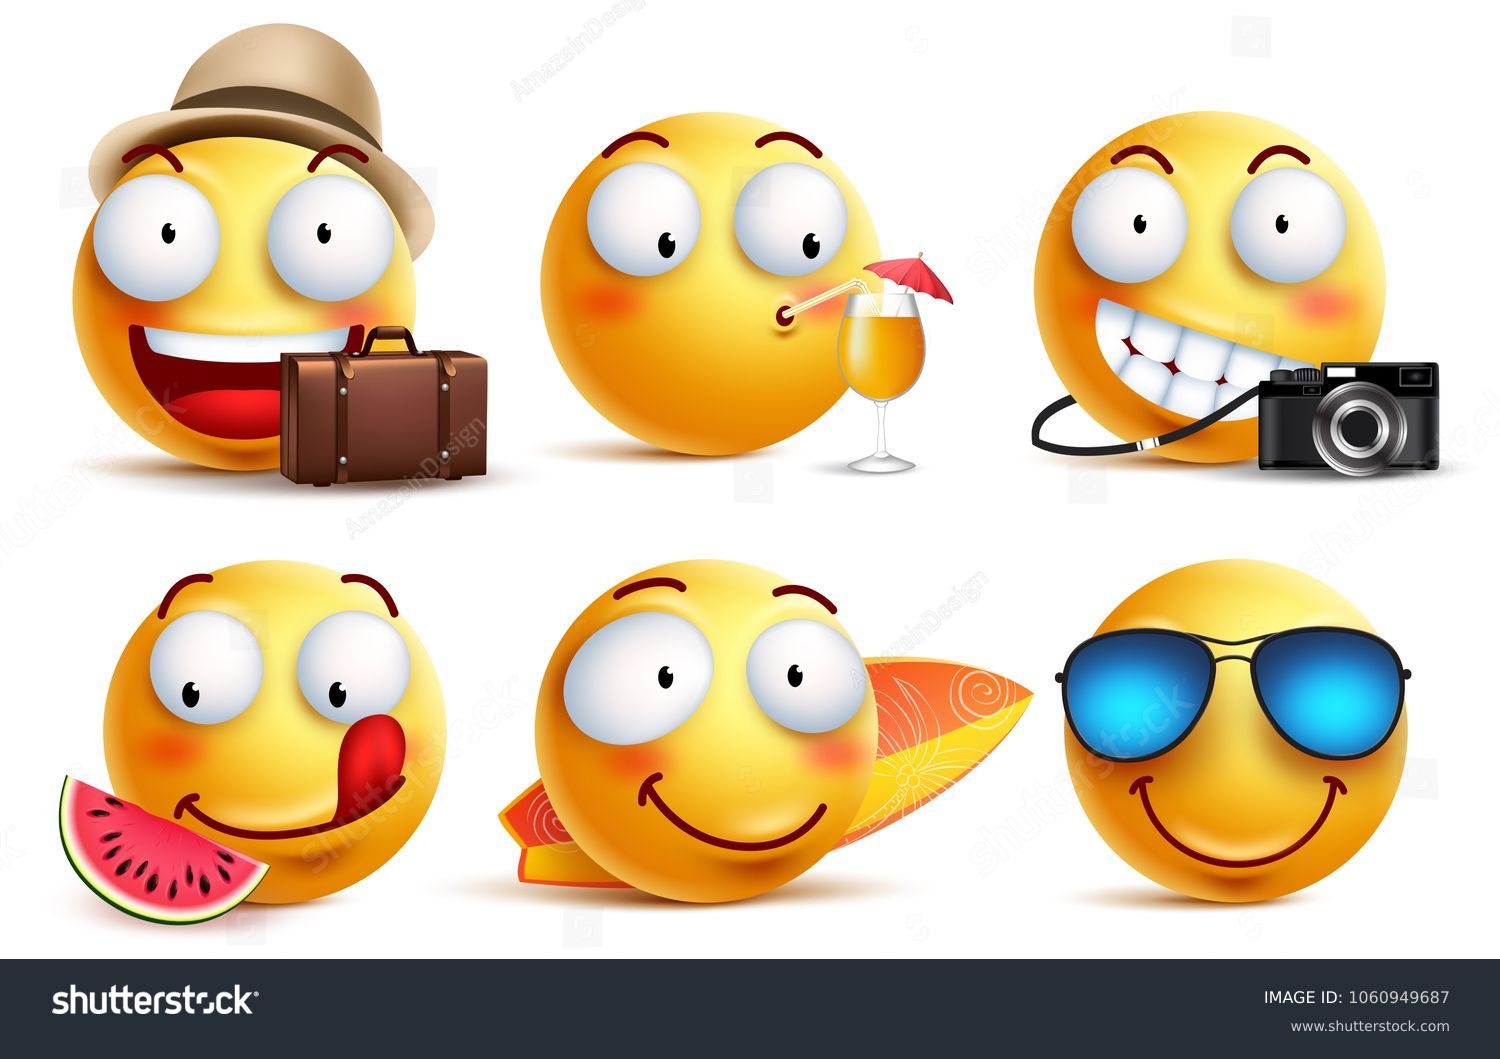 SVG of Summer smileys vector set with facial expressions. Yellow smiley face emoticons with summer vacation and travel outfits and elements isolated in white background. Vector illustration.
 svg